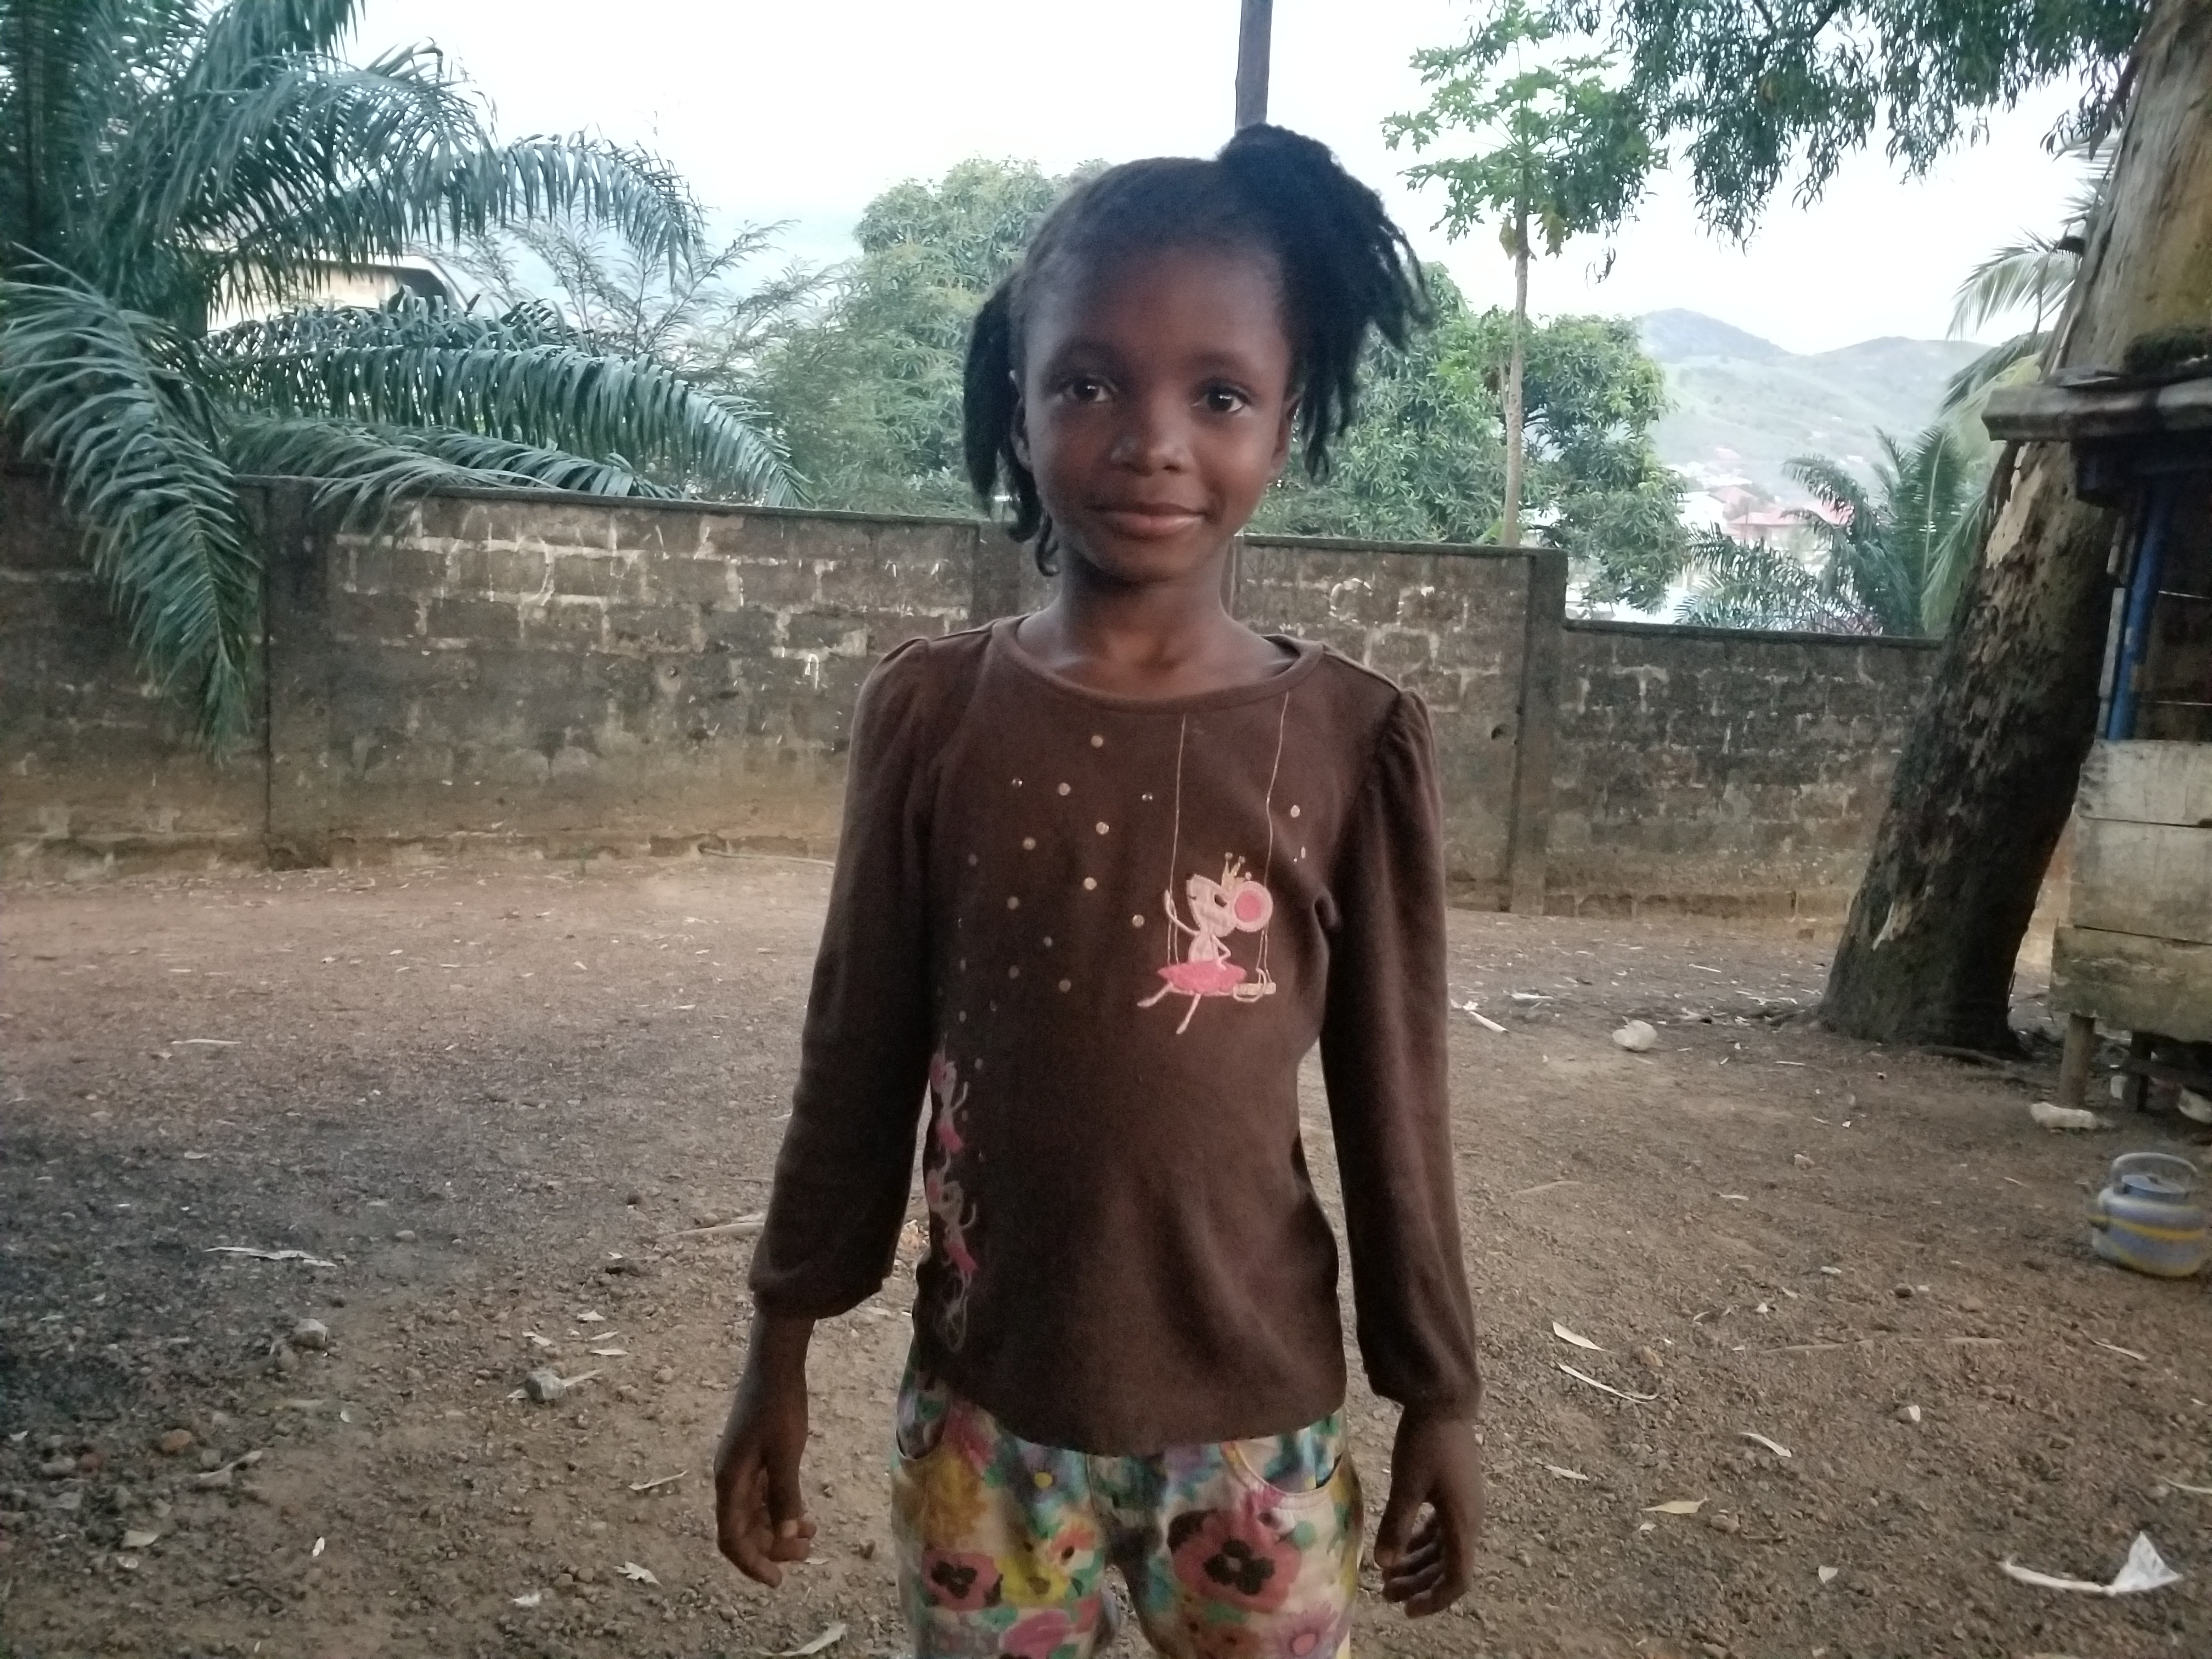 Aminata & Her Family are Thankful for Support